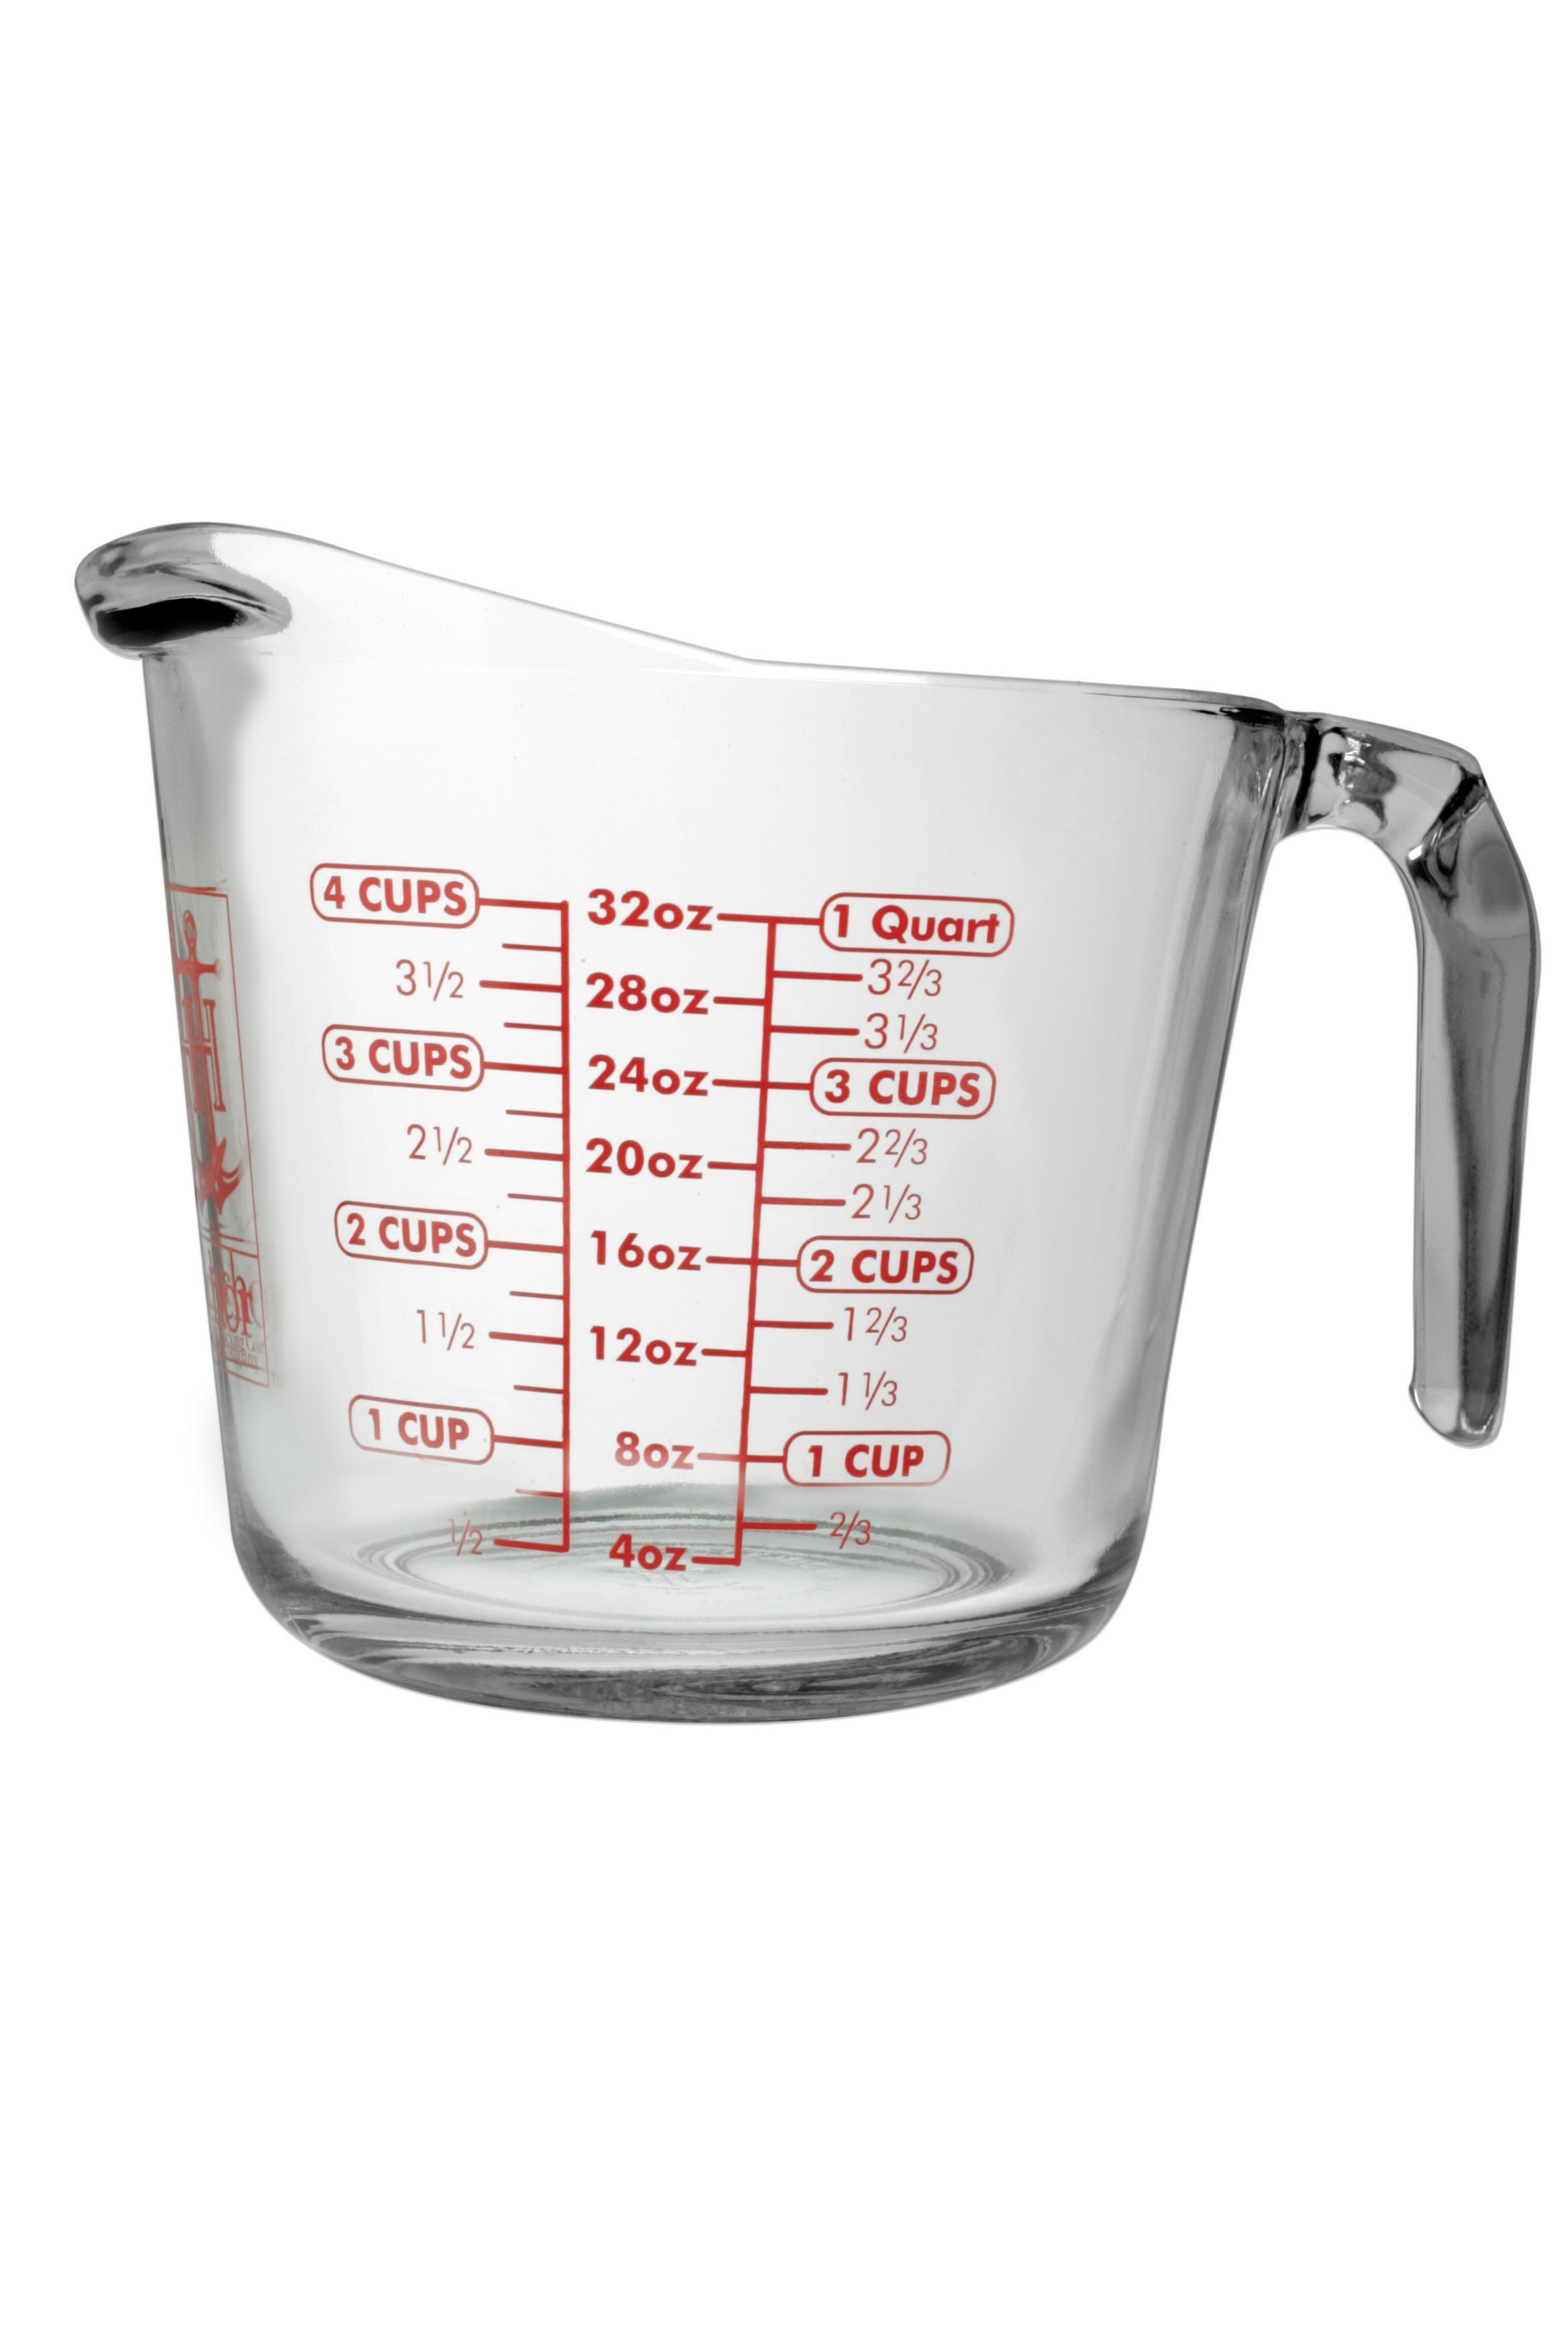 Anchor Hocking Glass Measuring Jug Cup 1 Litre online at smithsofloughton.com